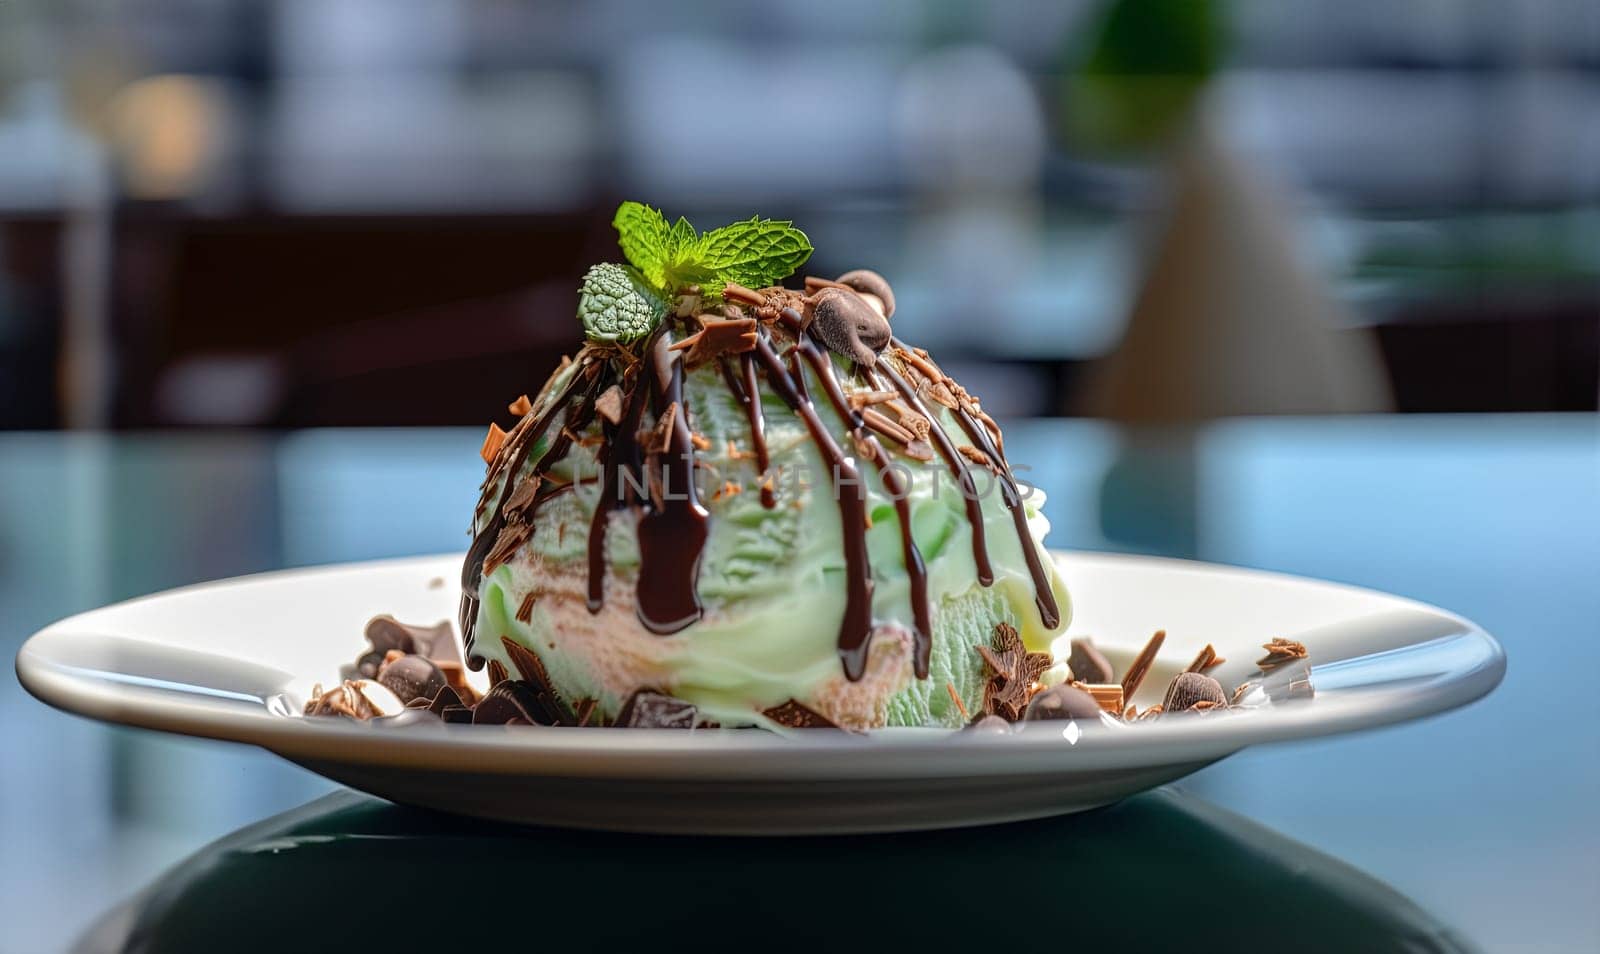 Delicious Ice Cream Dessert In The Pistachio Taste With Chocolate And Mint In A Cafe by tan4ikk1